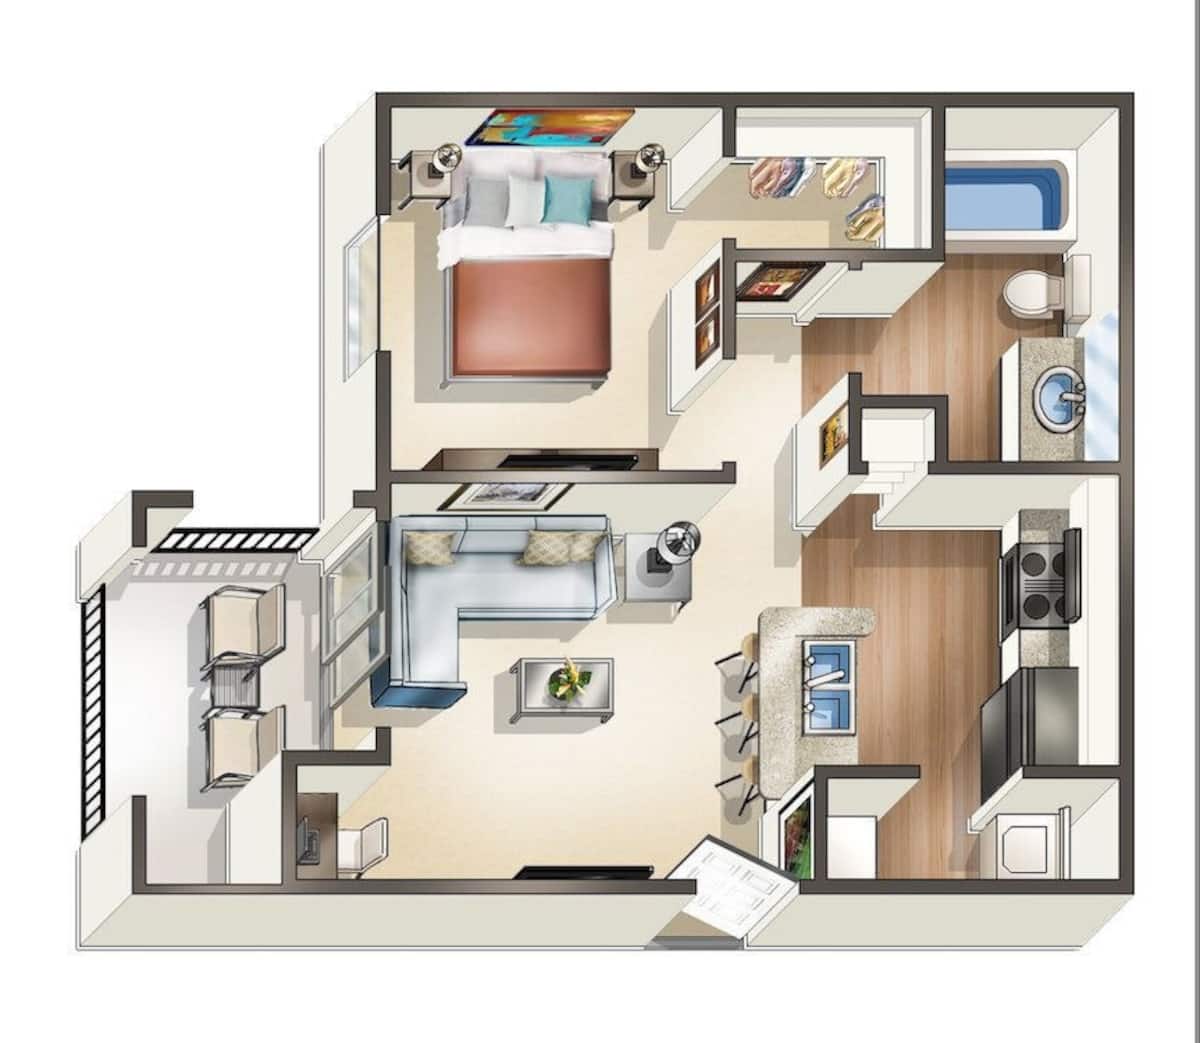 Floorplan diagram for A1AS, showing 1 bedroom